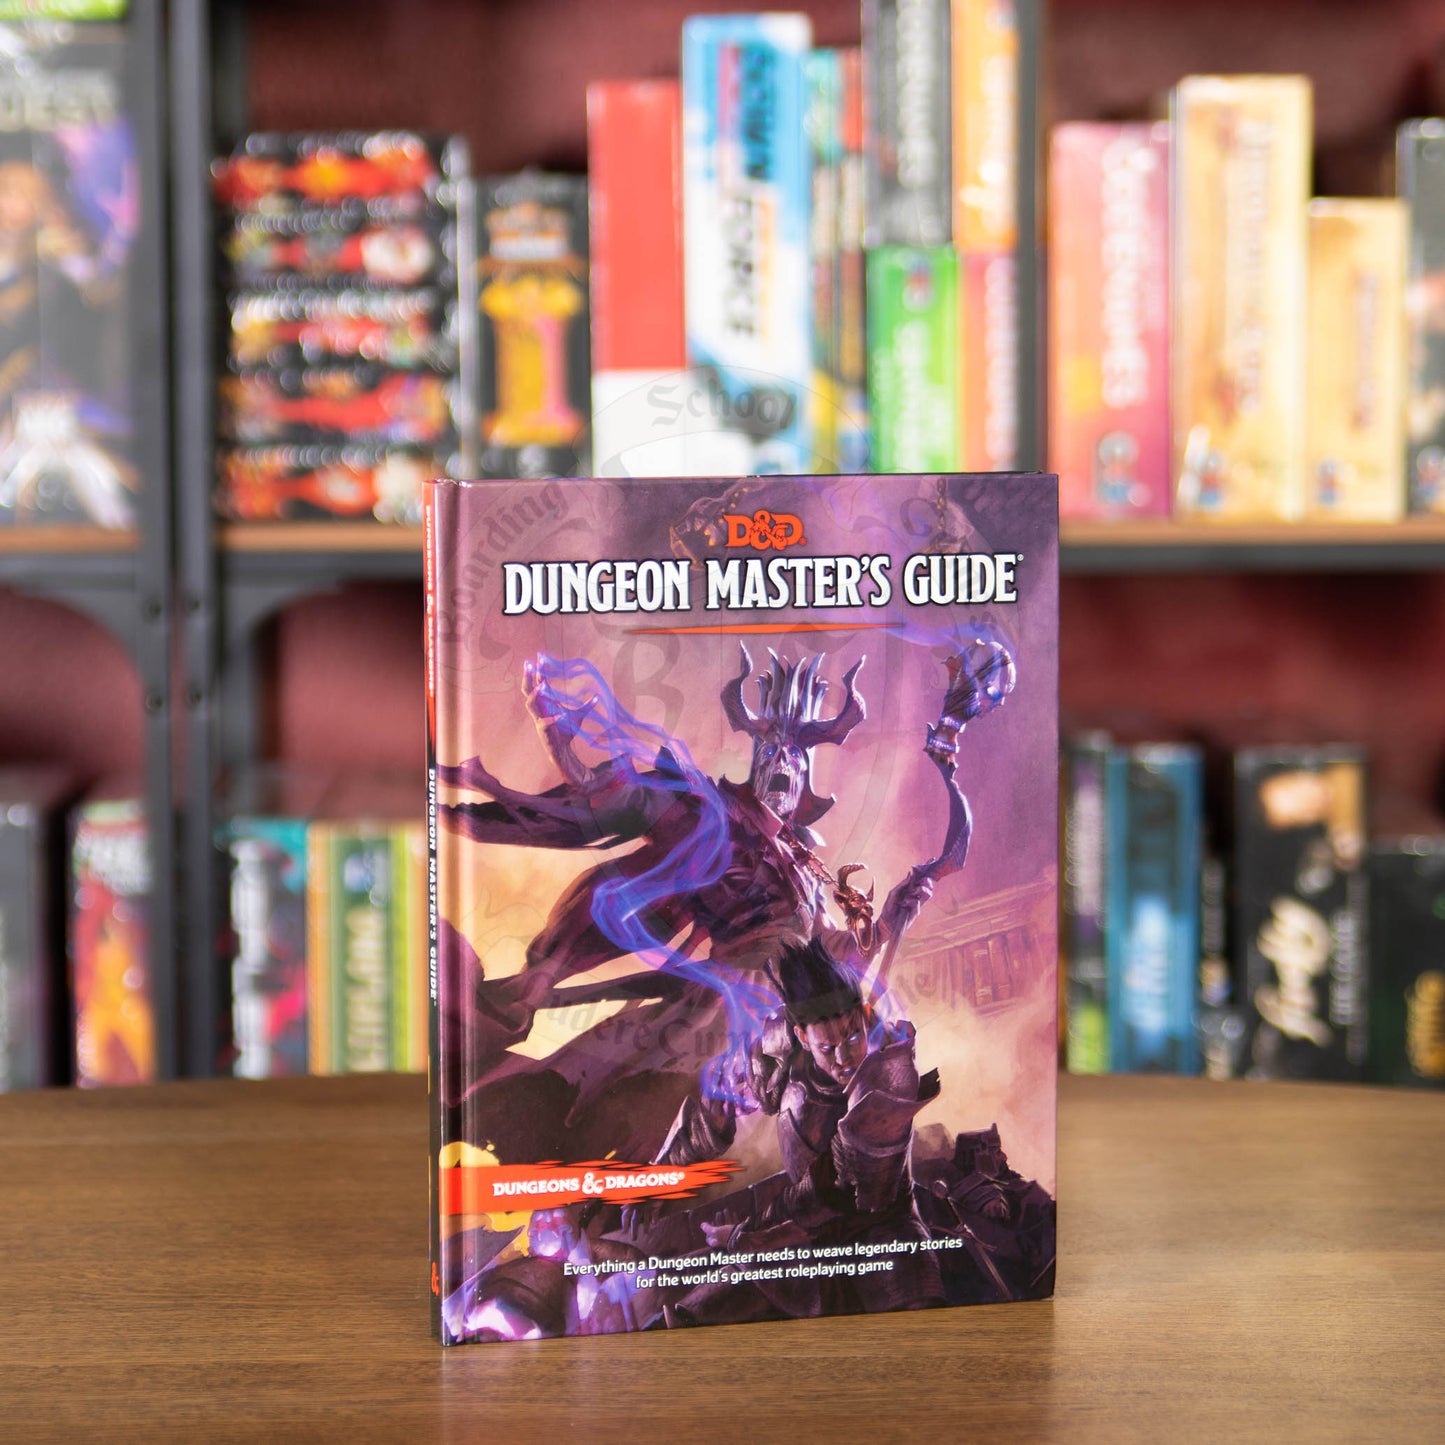 (BSG Certified USED) Dungeons & Dragons: 5th Edition - Dungeon Master's Guide